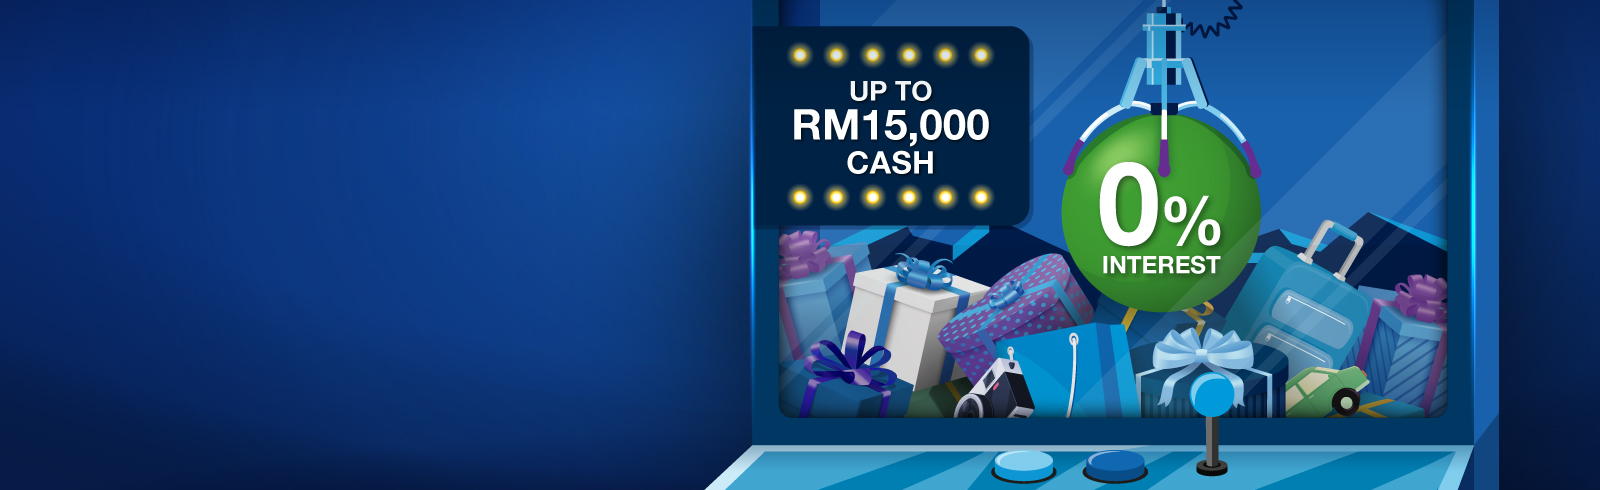 Get up to RM15,000 extra cash at 0% interest with any Standard Chartered credit card